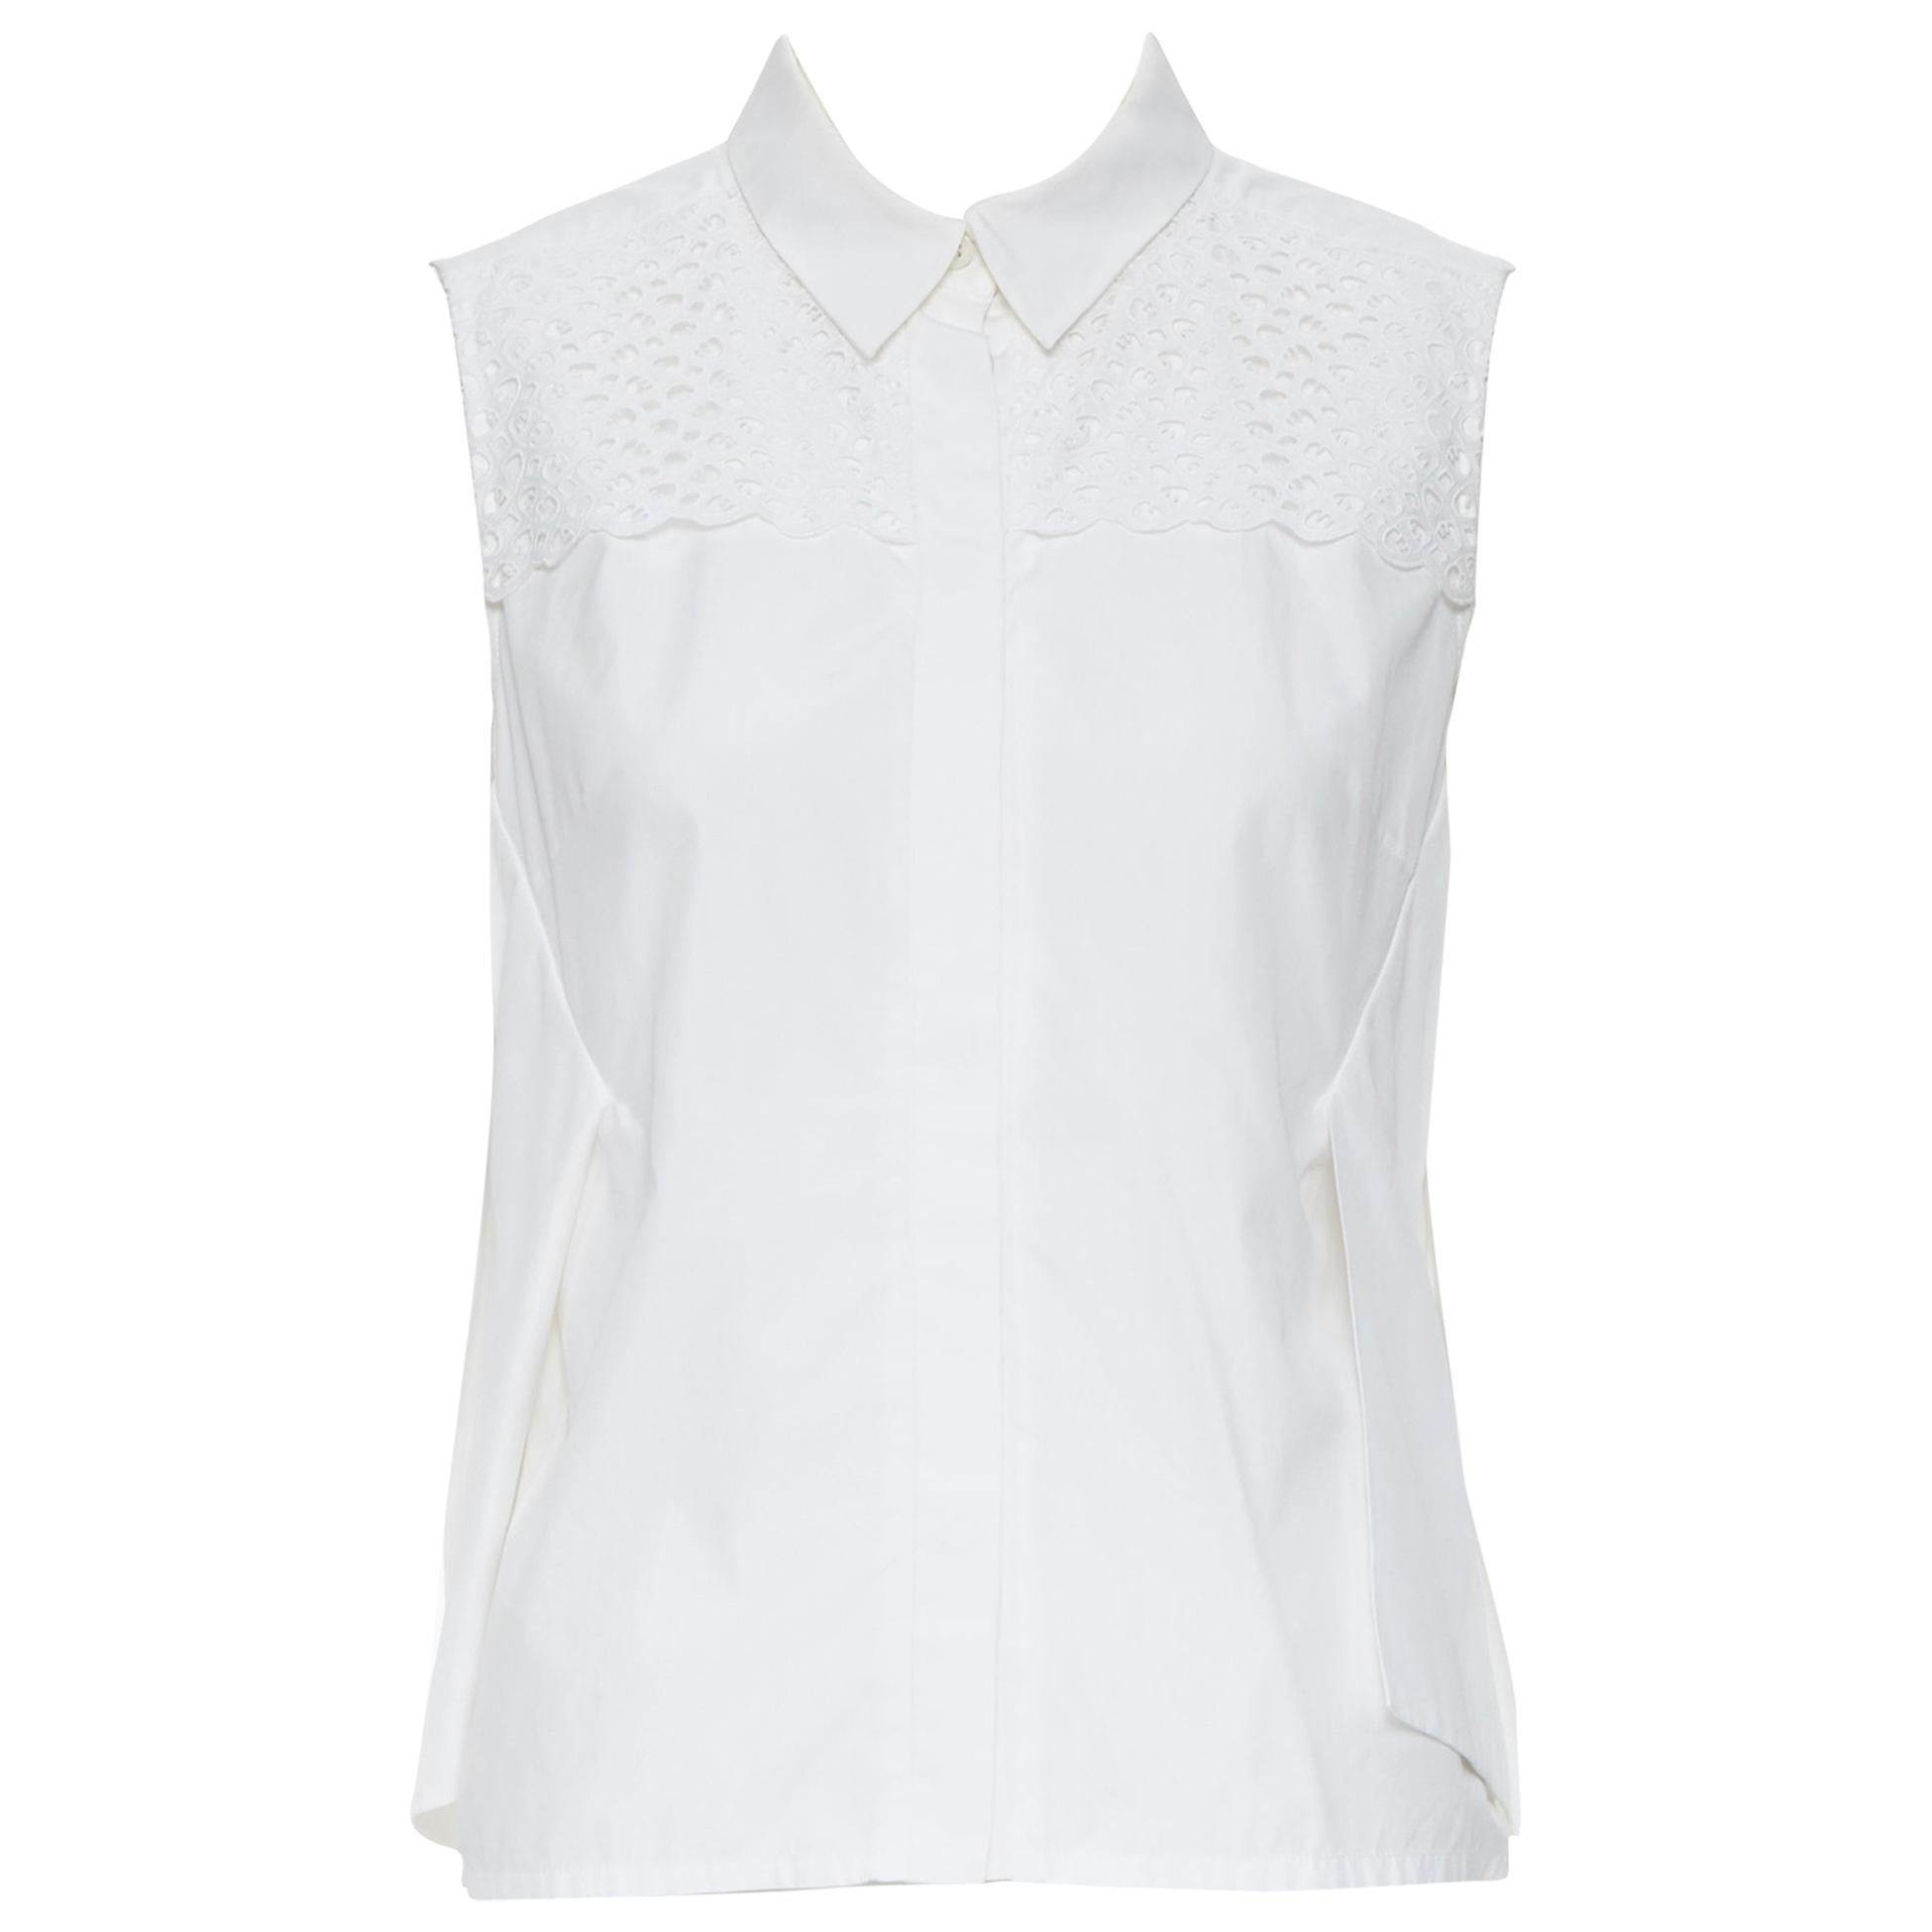 PETER PILOTTO white cotton embroidery anglais paneled panel sleeveless shirt S
Brand: Peter Pilotto
Designer: Peter Pilotto
Model Name / Style: Cotton shirt
Material: Cotton
Color: White
Pattern: Solid
Closure: Button
Extra Detail: Concealed button